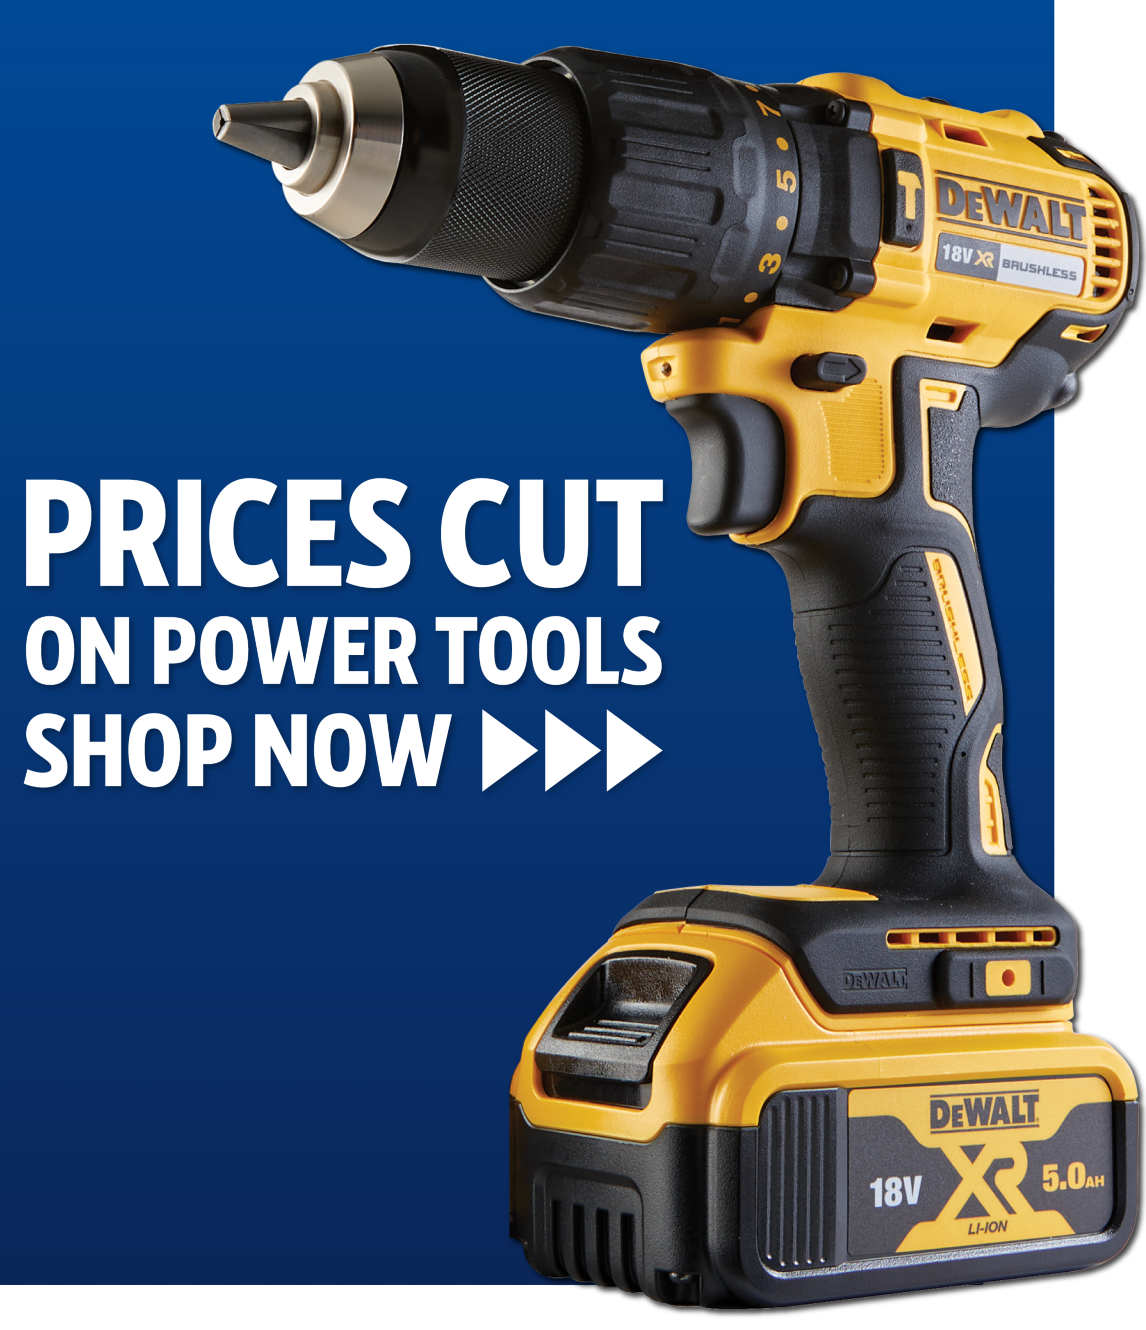 Prices Cut on Power Tools